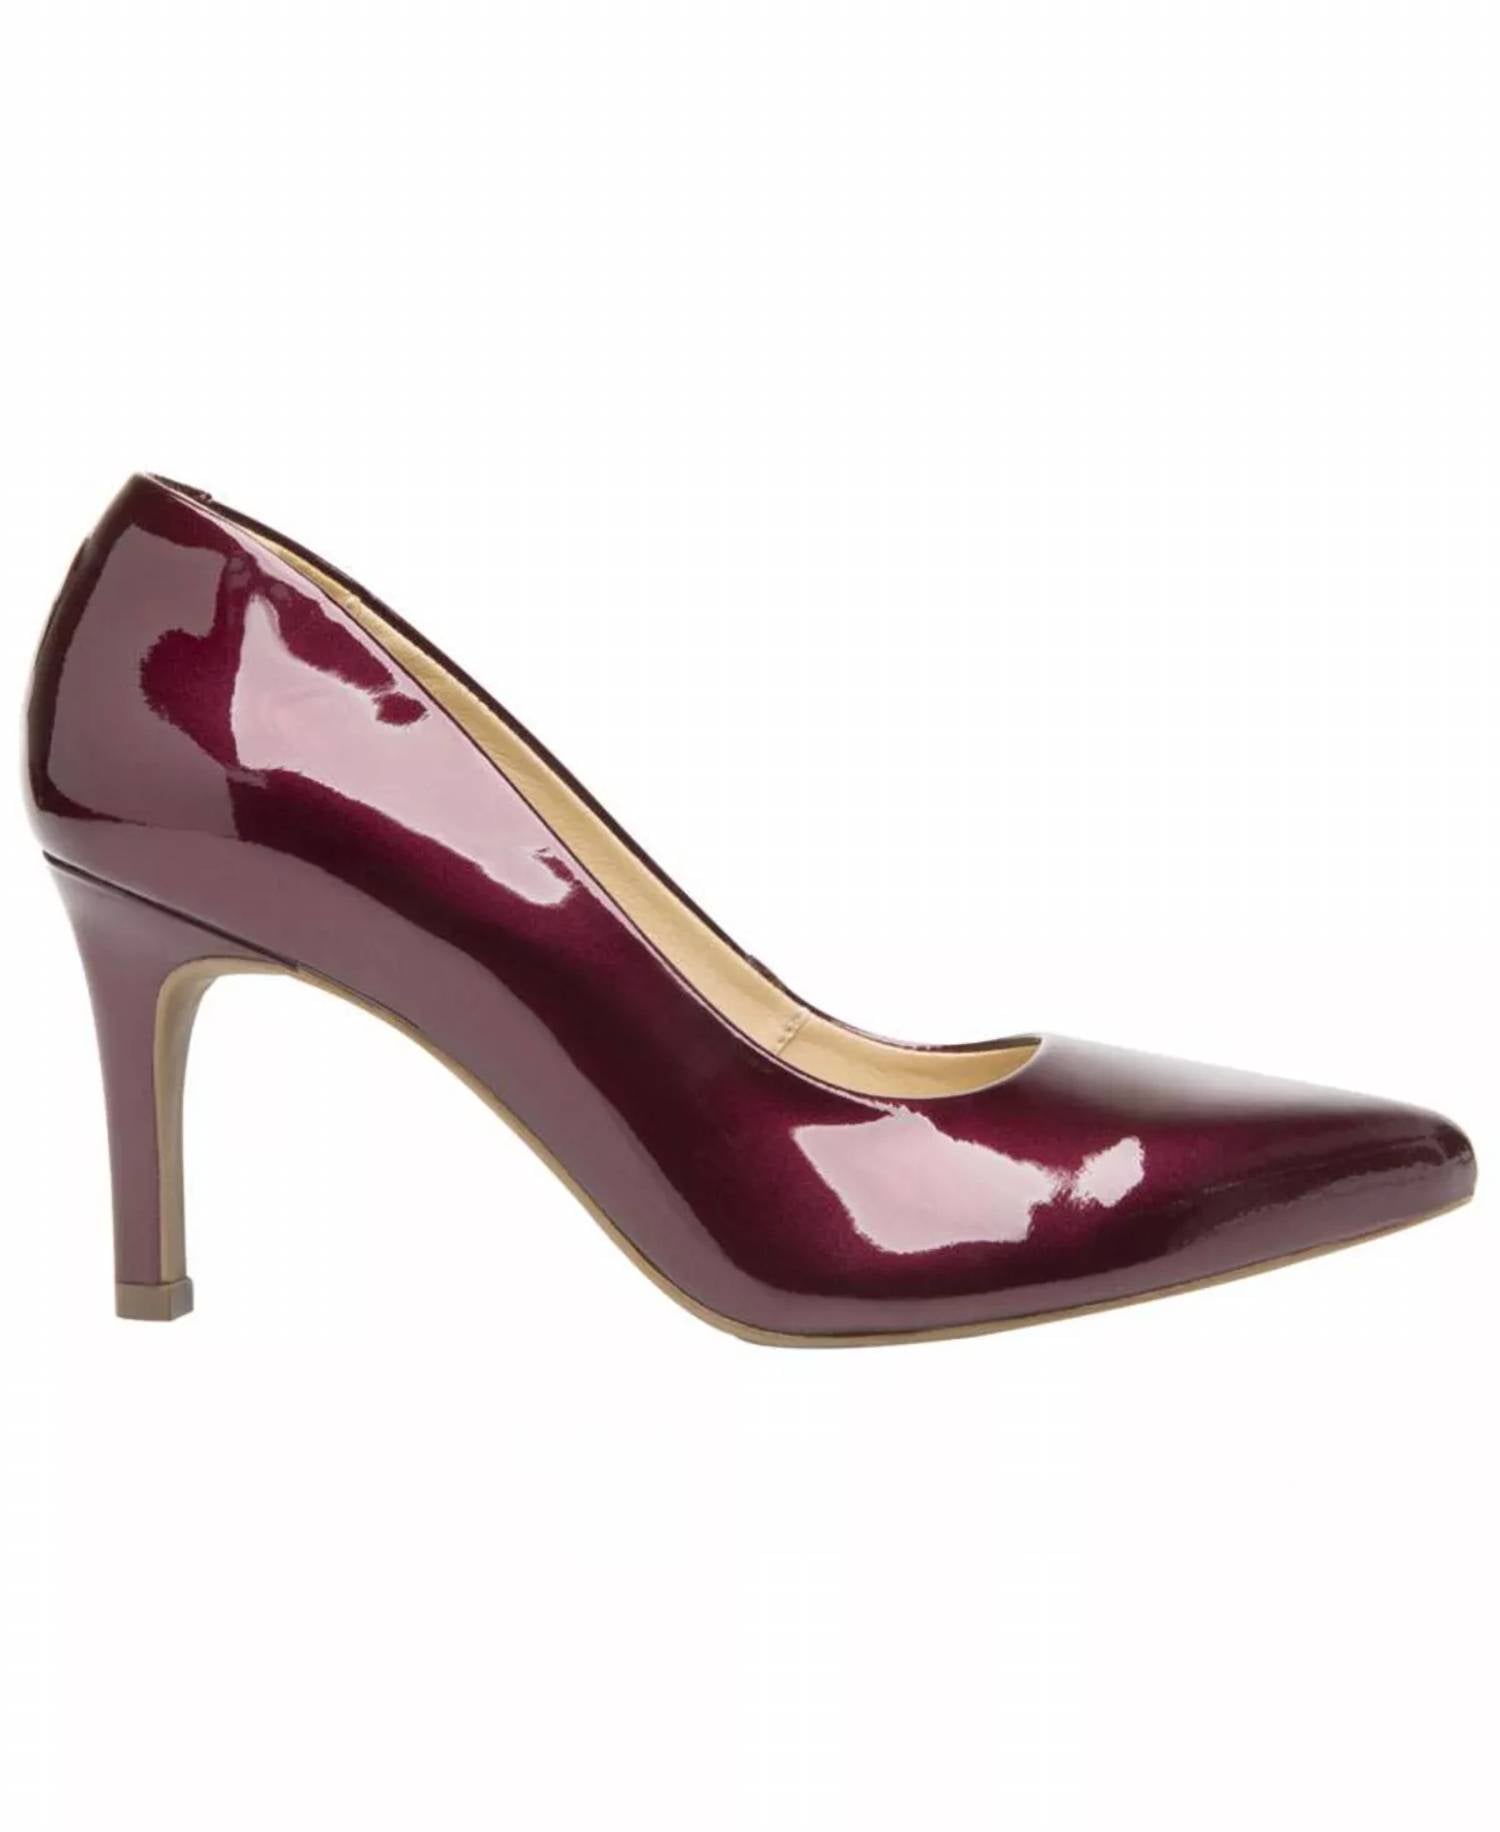 Flexi Patent Leather Dress Heels In Wine In Pink